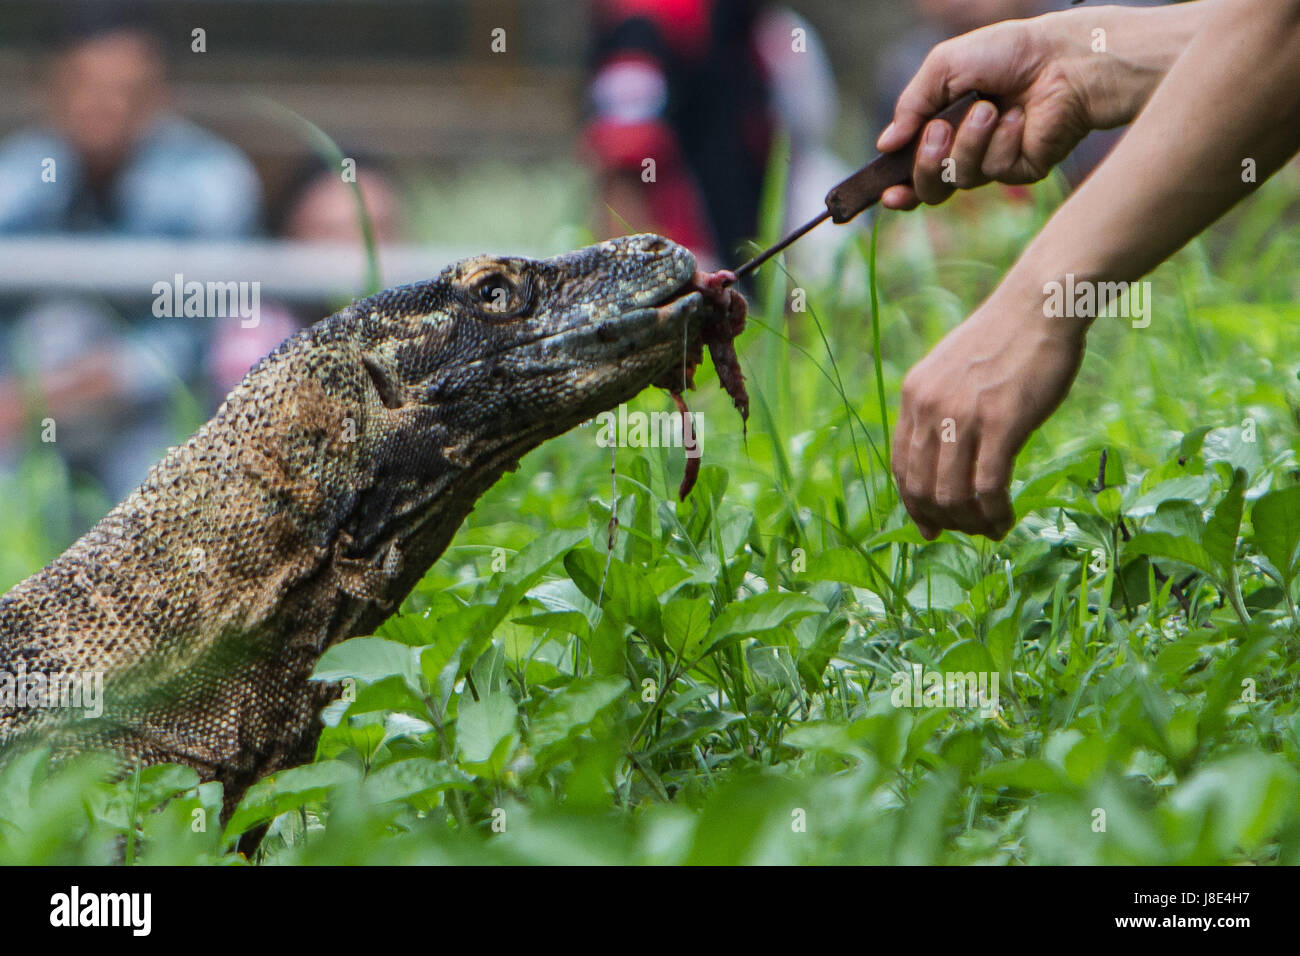 May 11, 2017 - South Jakarta, Jakarta, Indonesia - Picture taken on May 11, 2017 - A ranger feeding a Komodo dragon at Ragunan Zoo, Jakarta, Indonesia. Komodos regularly eat carrion but rarely fall ill because they carry proteins called antimicrobial peptides, an all purpose infection defense. The researchers analyzed blood samples from captive Komodos in Florida using a mass spectrometer to identify peptides with drug potential. A biochemistry professor at George Mason University, says his team is betting Komodo blood can help battle antibiotic resistant bacteria, which kill about 700,000 peo Stock Photo